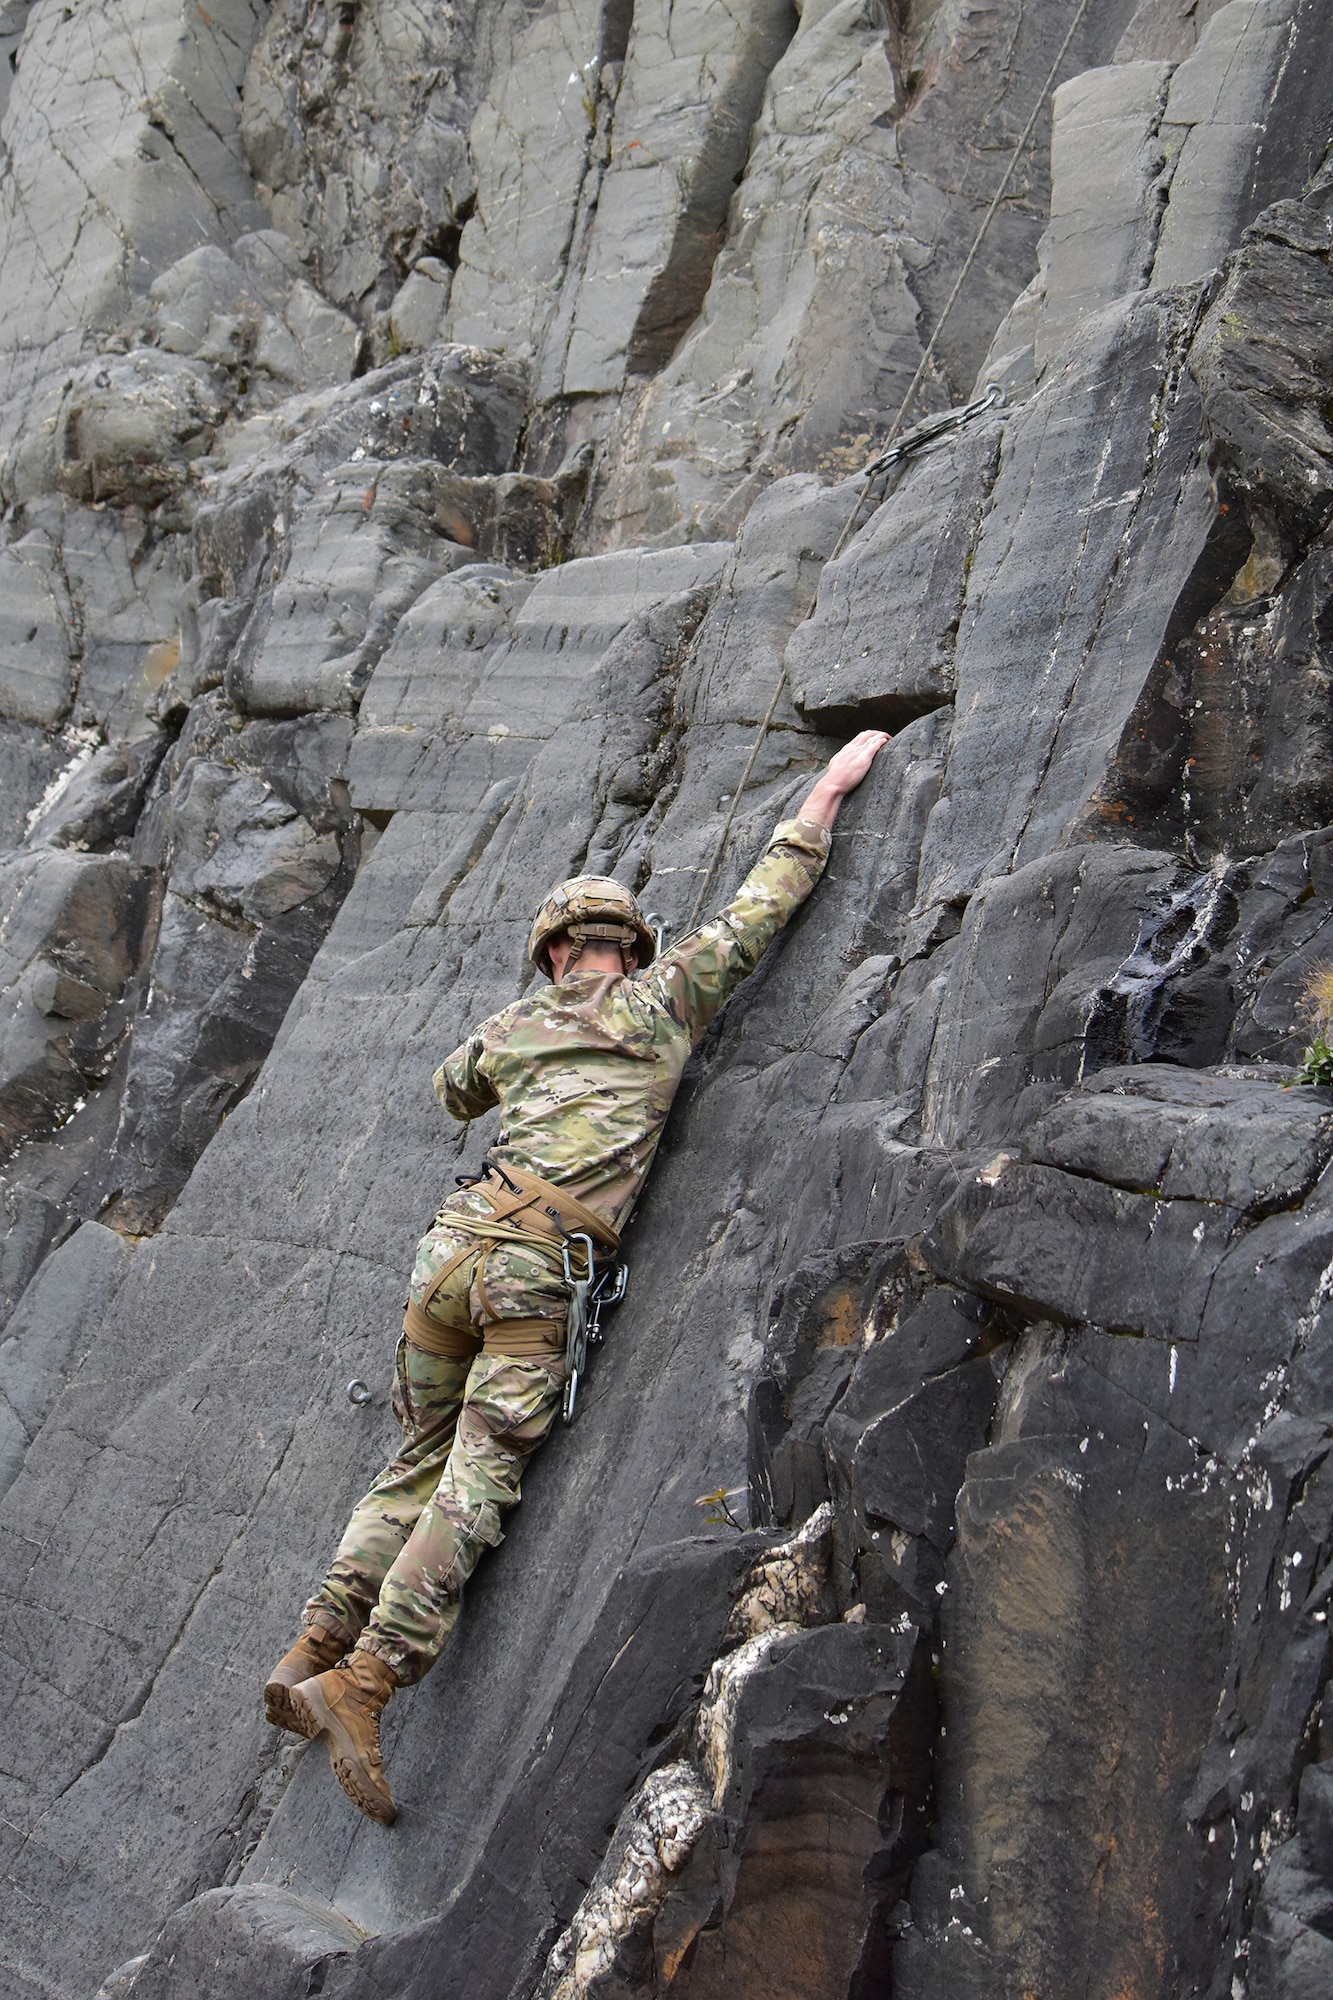 An Advanced Military Mountaineering Course student searches for a route up a rock face at the Northern Warfare Training Center’s Black Rapids Site during training. NWTC cadre followed Coronavirus restrictions while guiding students through both the basic and advanced mountaineering courses in August. With the advent of Alaska’s long, cold winter, NWTC’s focus is now shifting to cold weather training for the 2020-21 season.